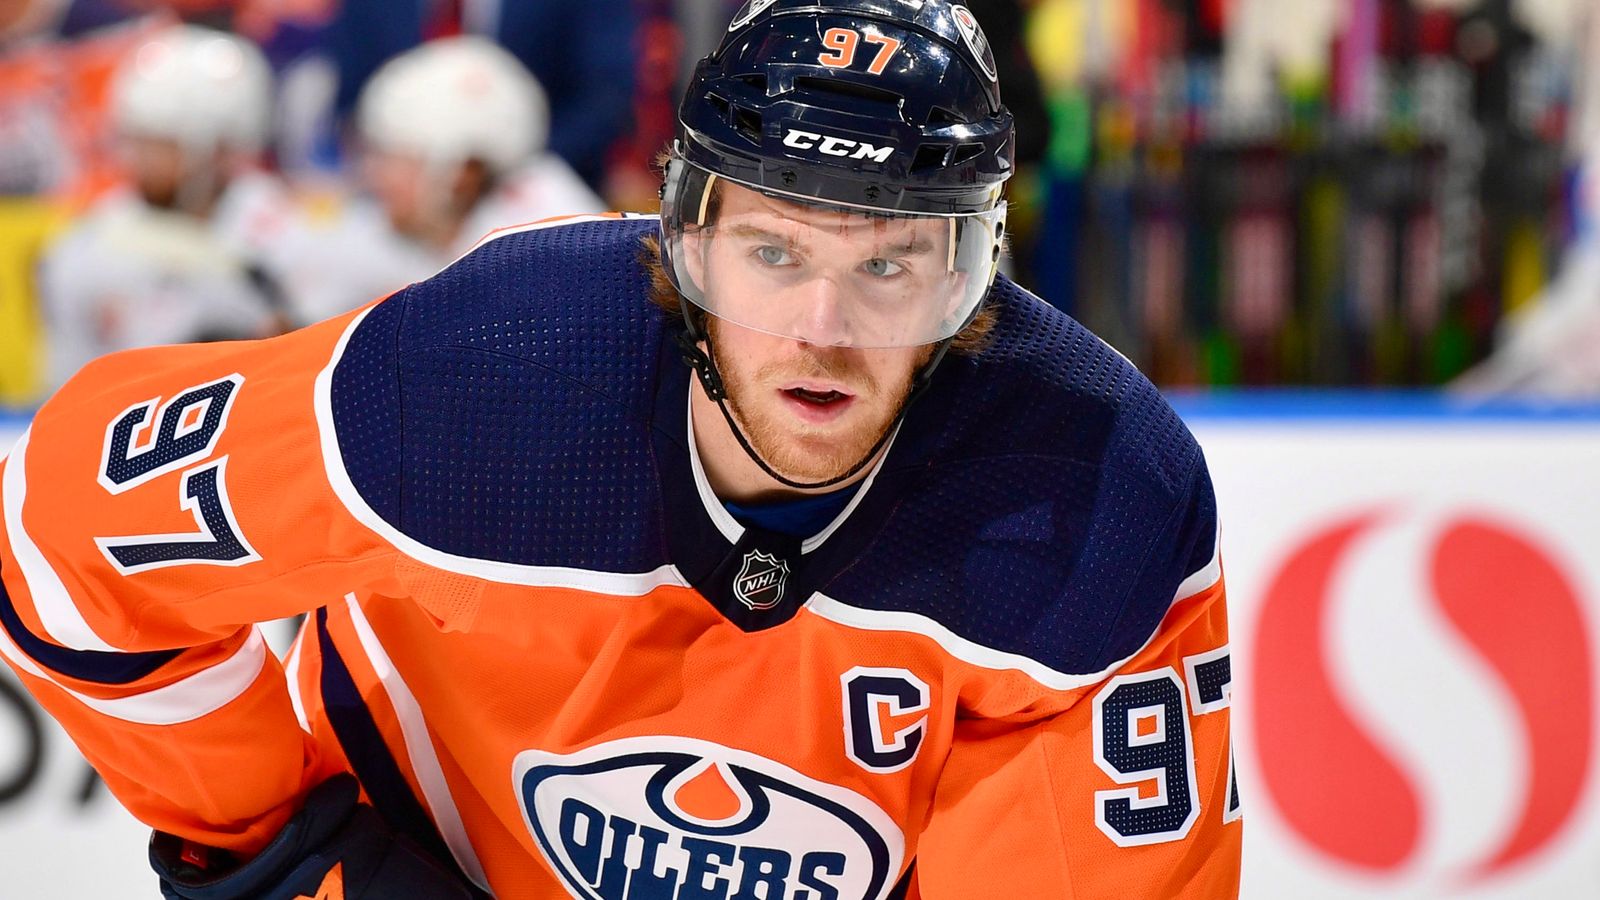 WATCH: Connor McDavid scores gorgeous goal with solo effort